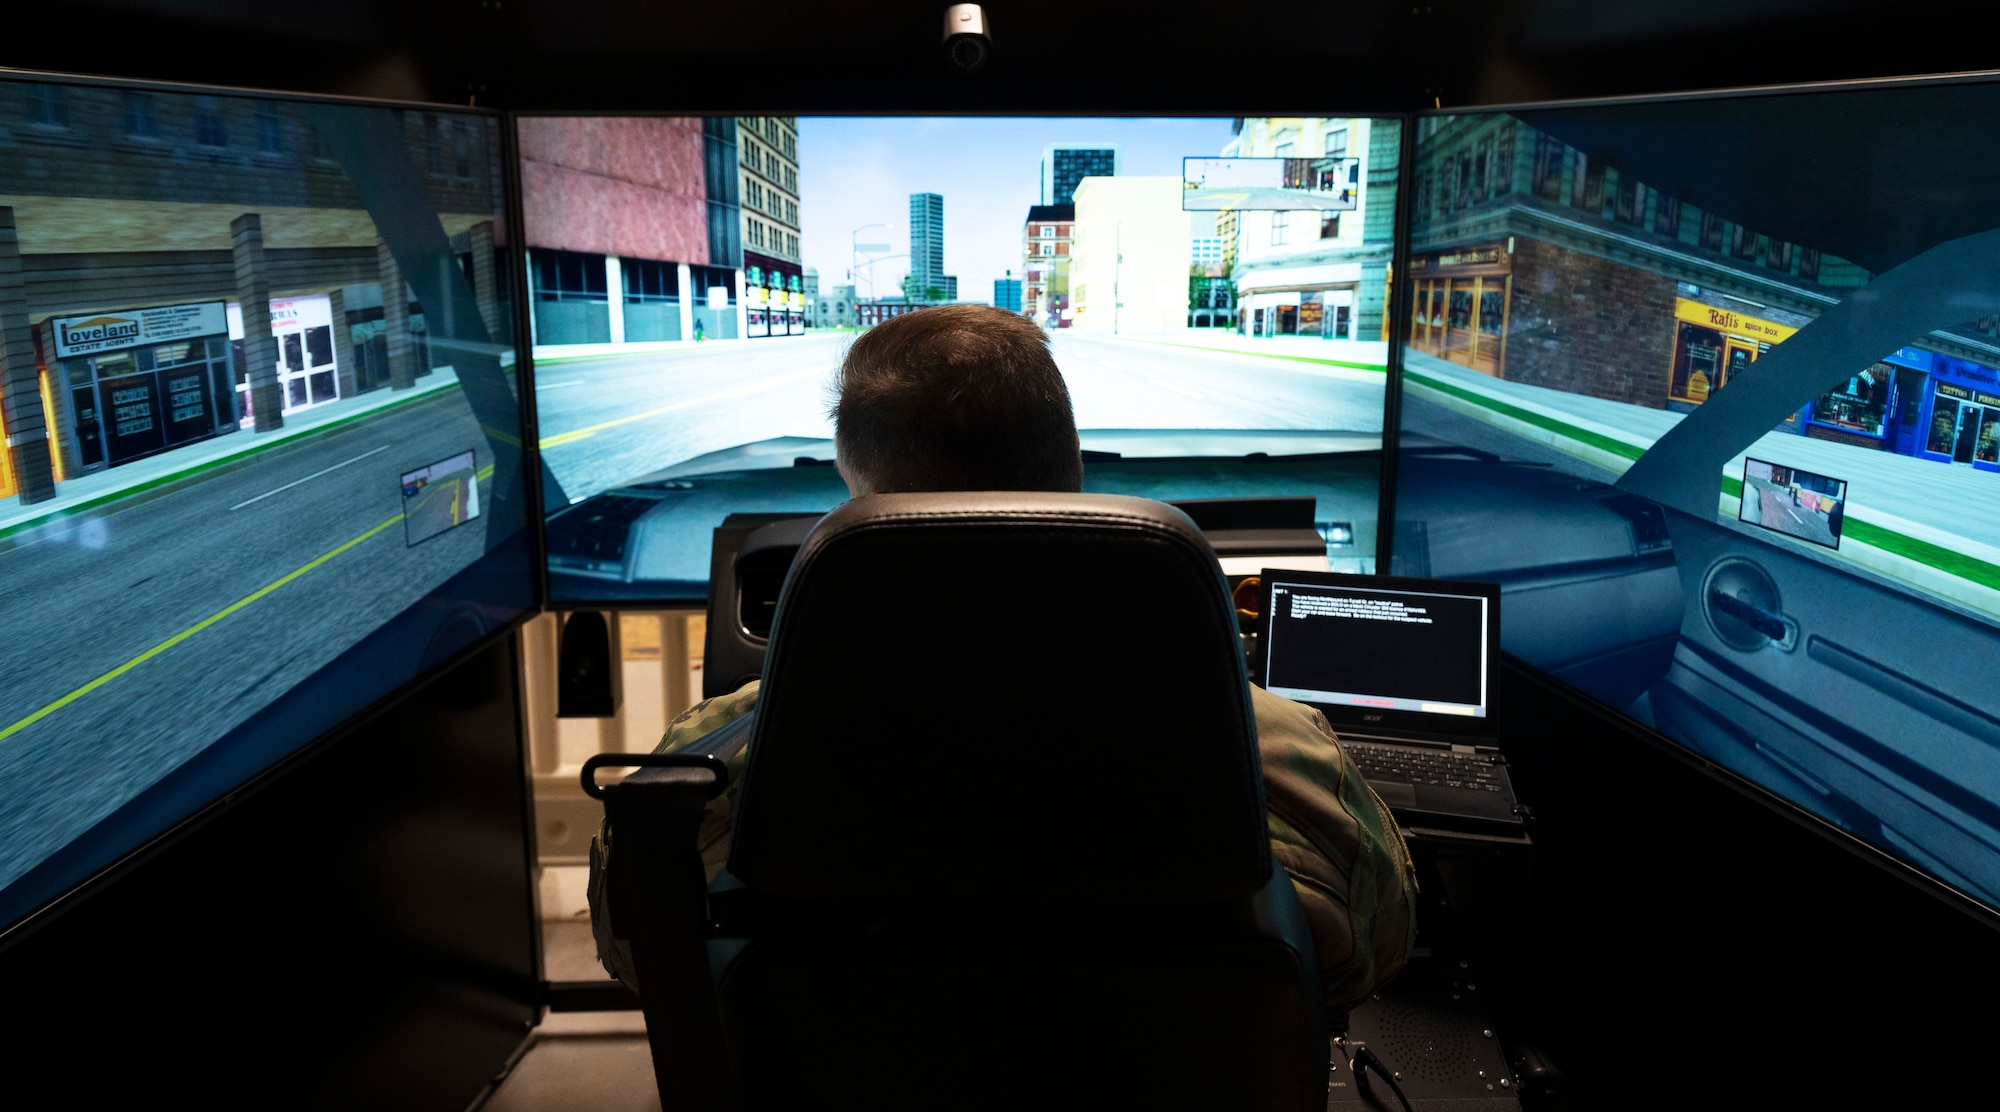 U.S. Air Force Col. Hall Sebren Jr., 72nd Air Base Wing Commander, Tinker Air Force Base, Oklahoma, uses a driving simulator at Ramstein Air Base, Germany, Jan. 12, 2022. Sebren inspected the 569th United States Forces Police Squadron as part of the 2022 Commander-in-Chief’s Installation Excellence Award and inspected their combat readiness and force development including a driving simulator designed to help Airmen from the 569th USFPS improve their ability to perform traffic stops. (U.S. Air Force photo by Senior Airman Thomas Karol)